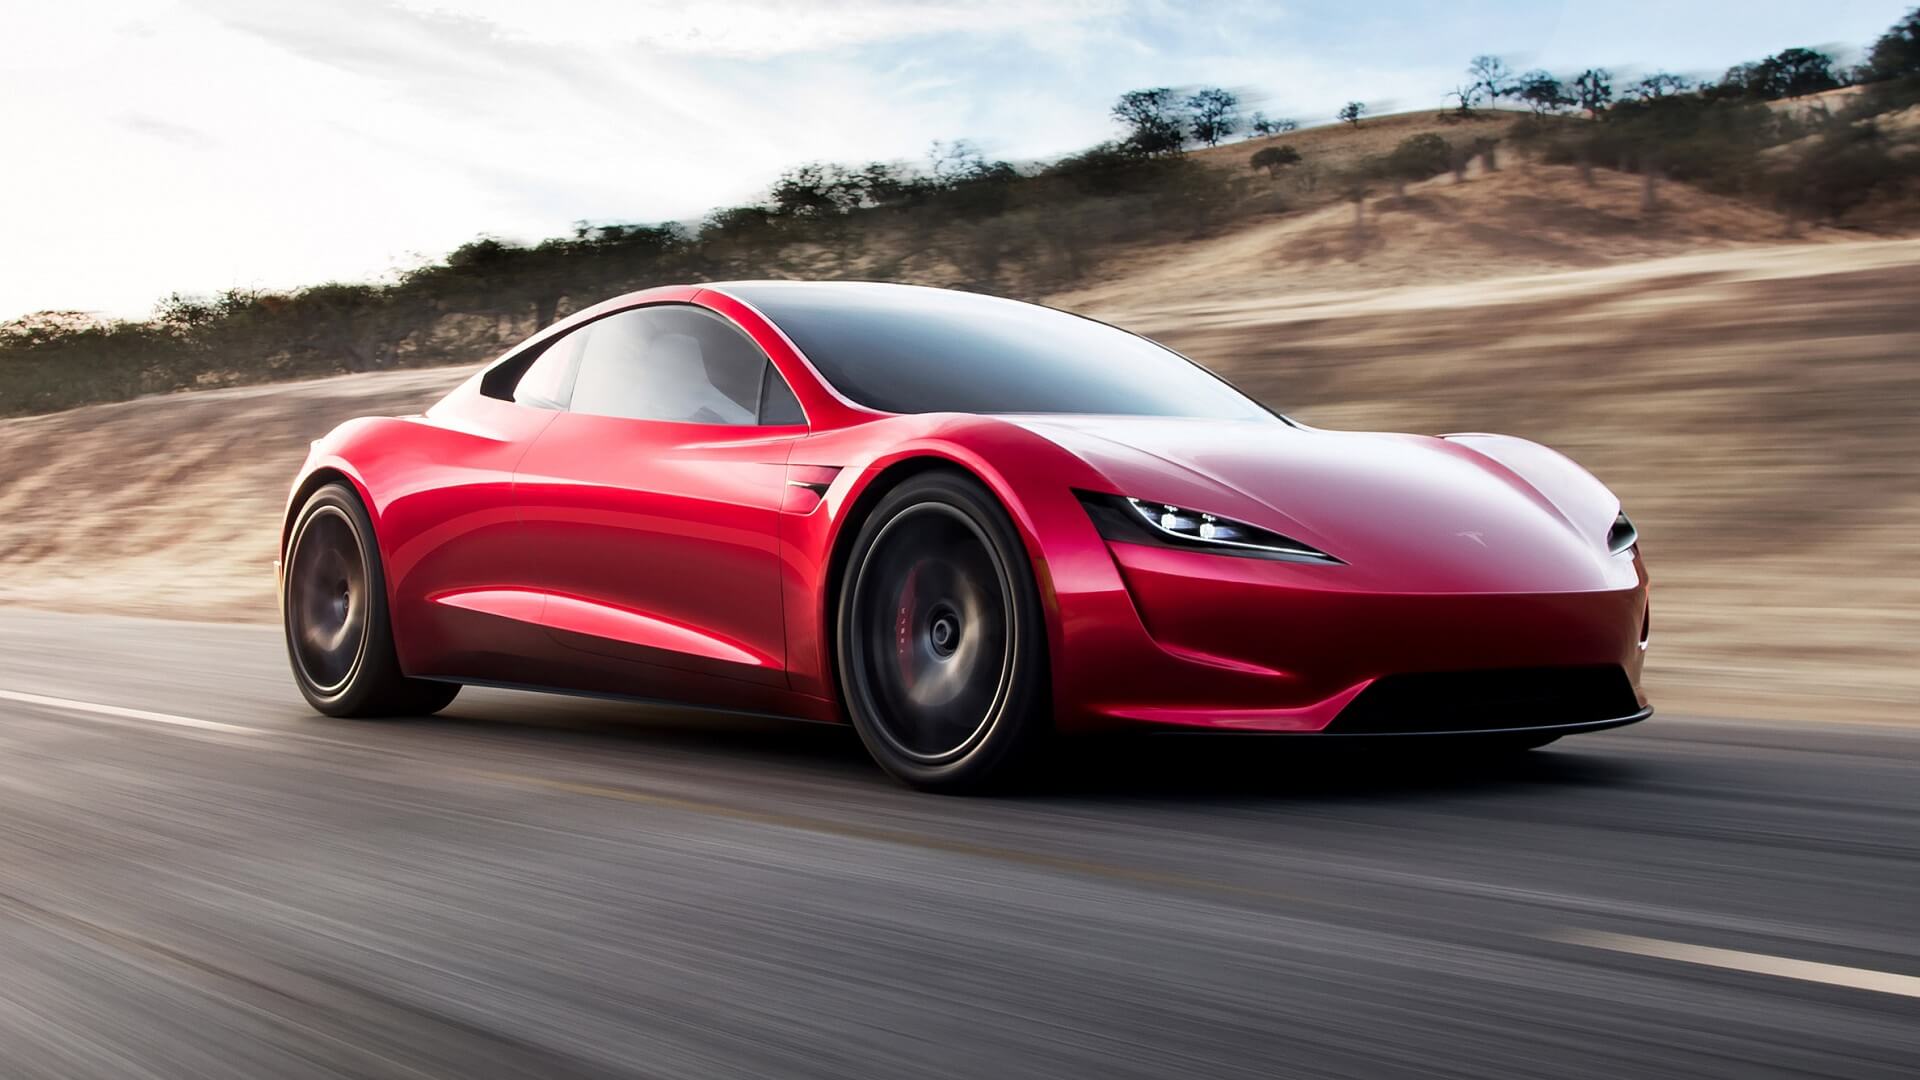 New Tesla Roadster – the fastest car in automotive history